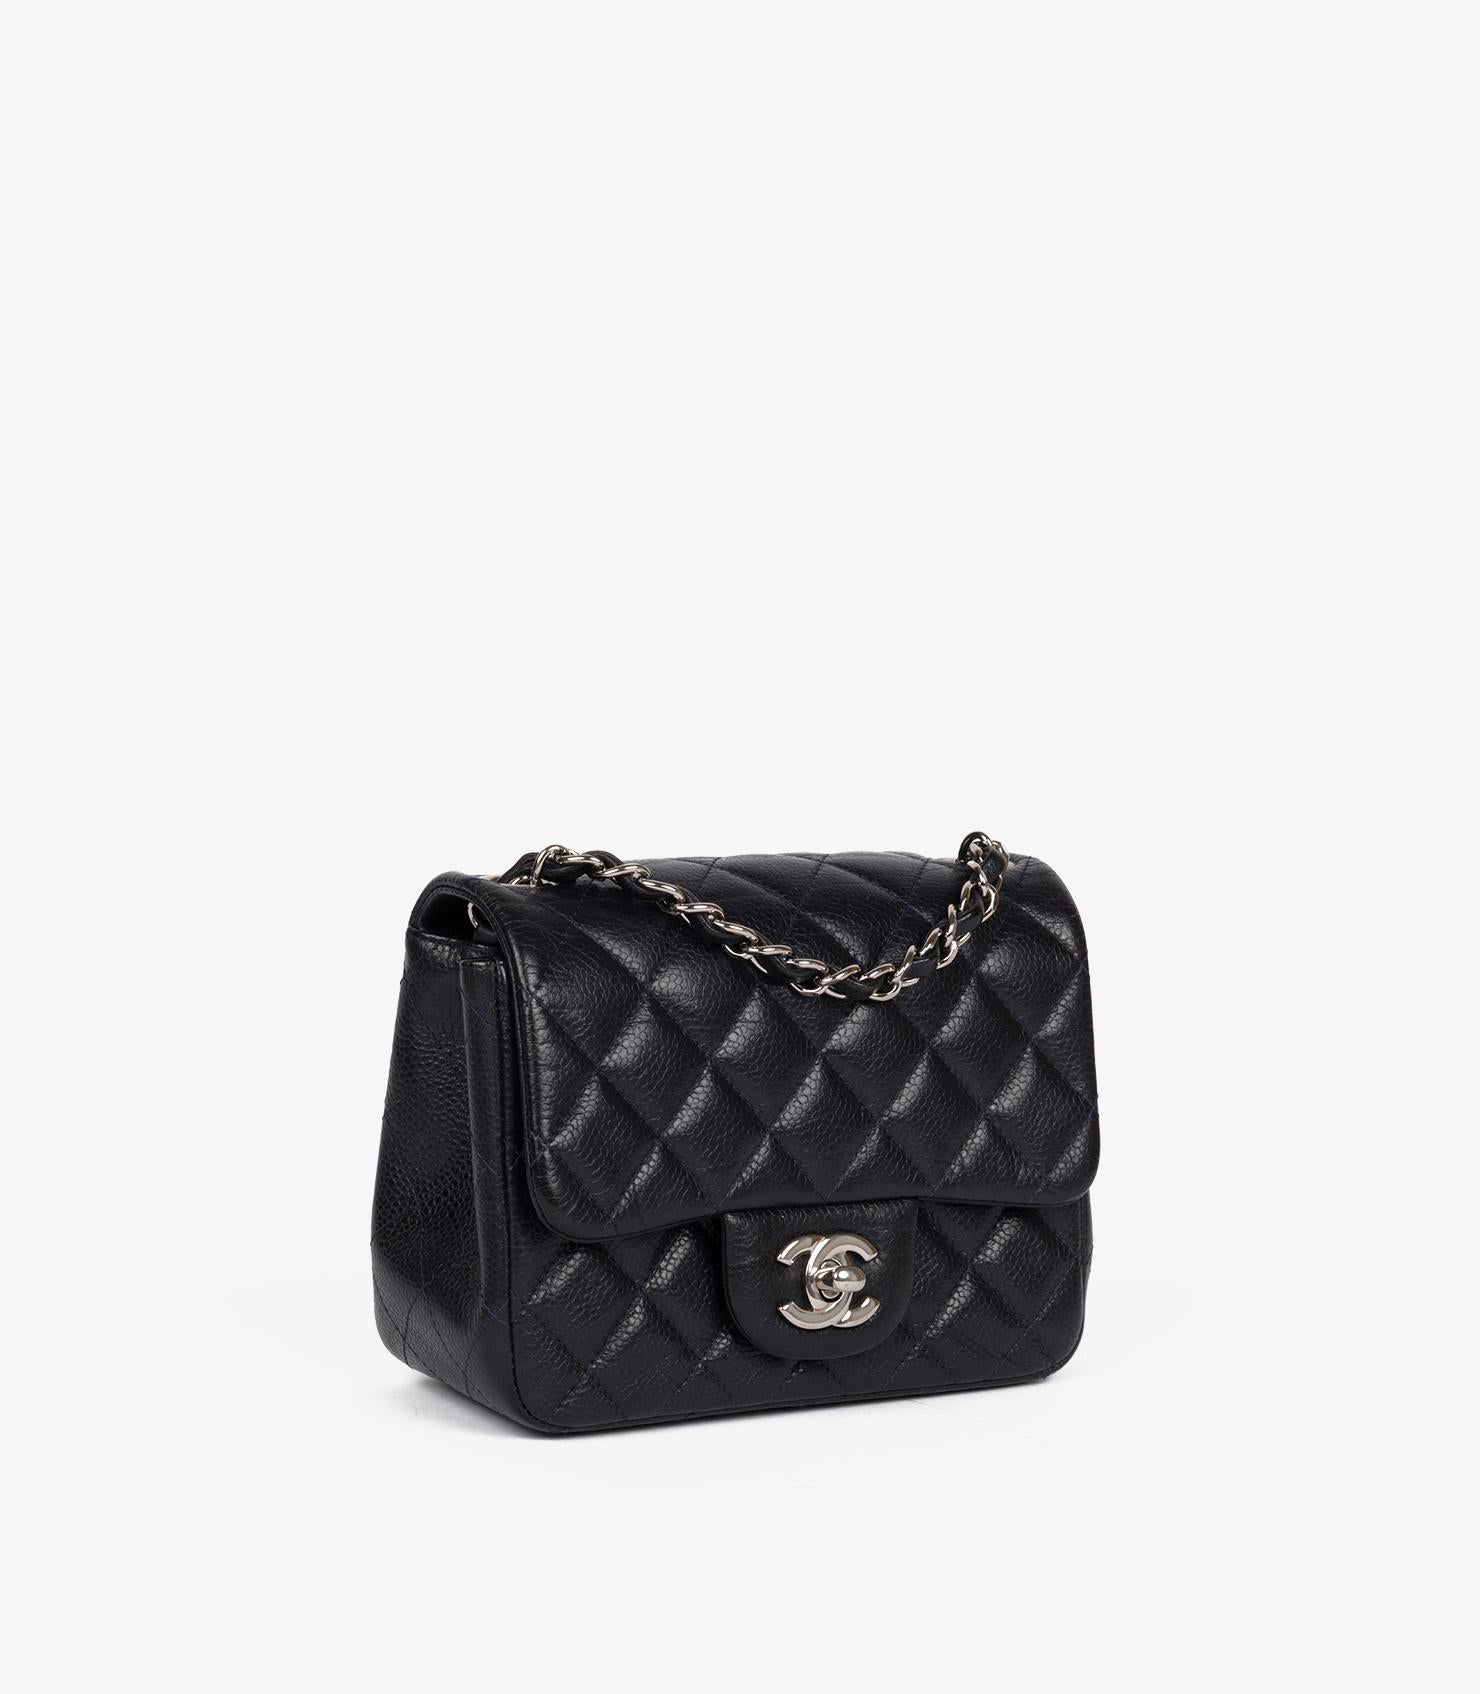 Chanel Indigo Quilted Washed Caviar Leather Square Mini Flap Bag In Excellent Condition For Sale In Bishop's Stortford, Hertfordshire